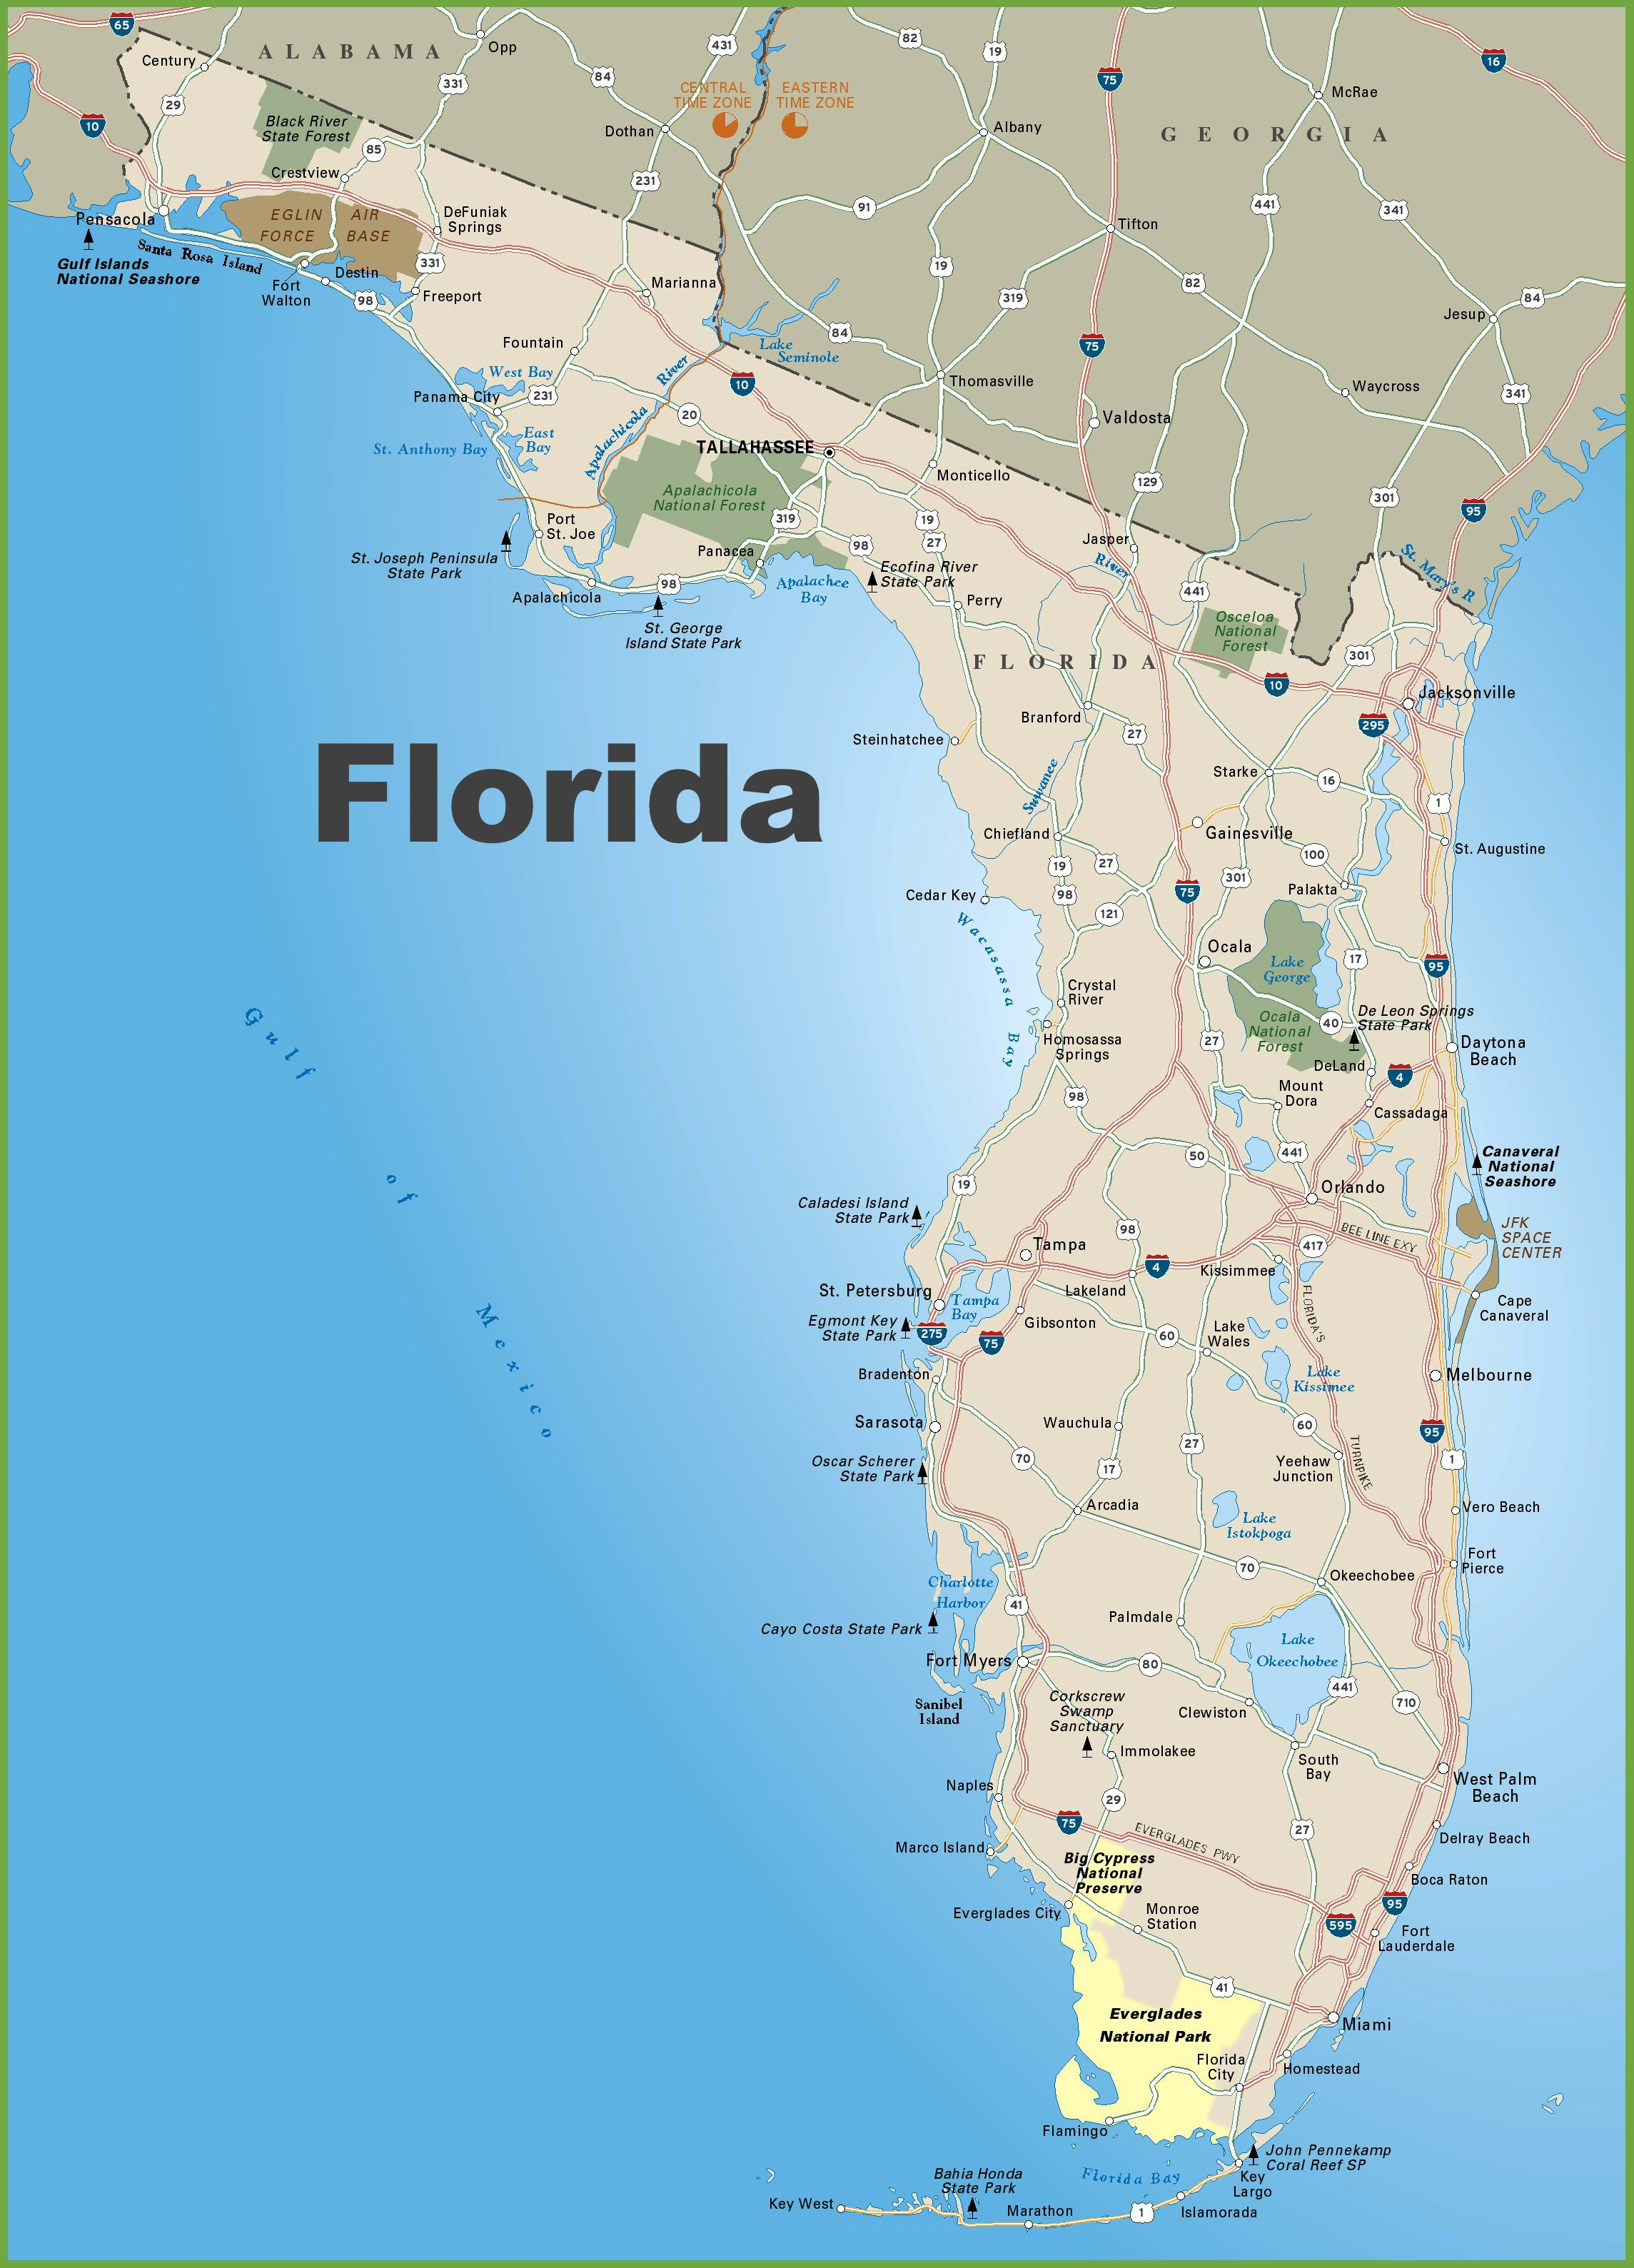 Florida Road Map - Highway Map Of South Florida